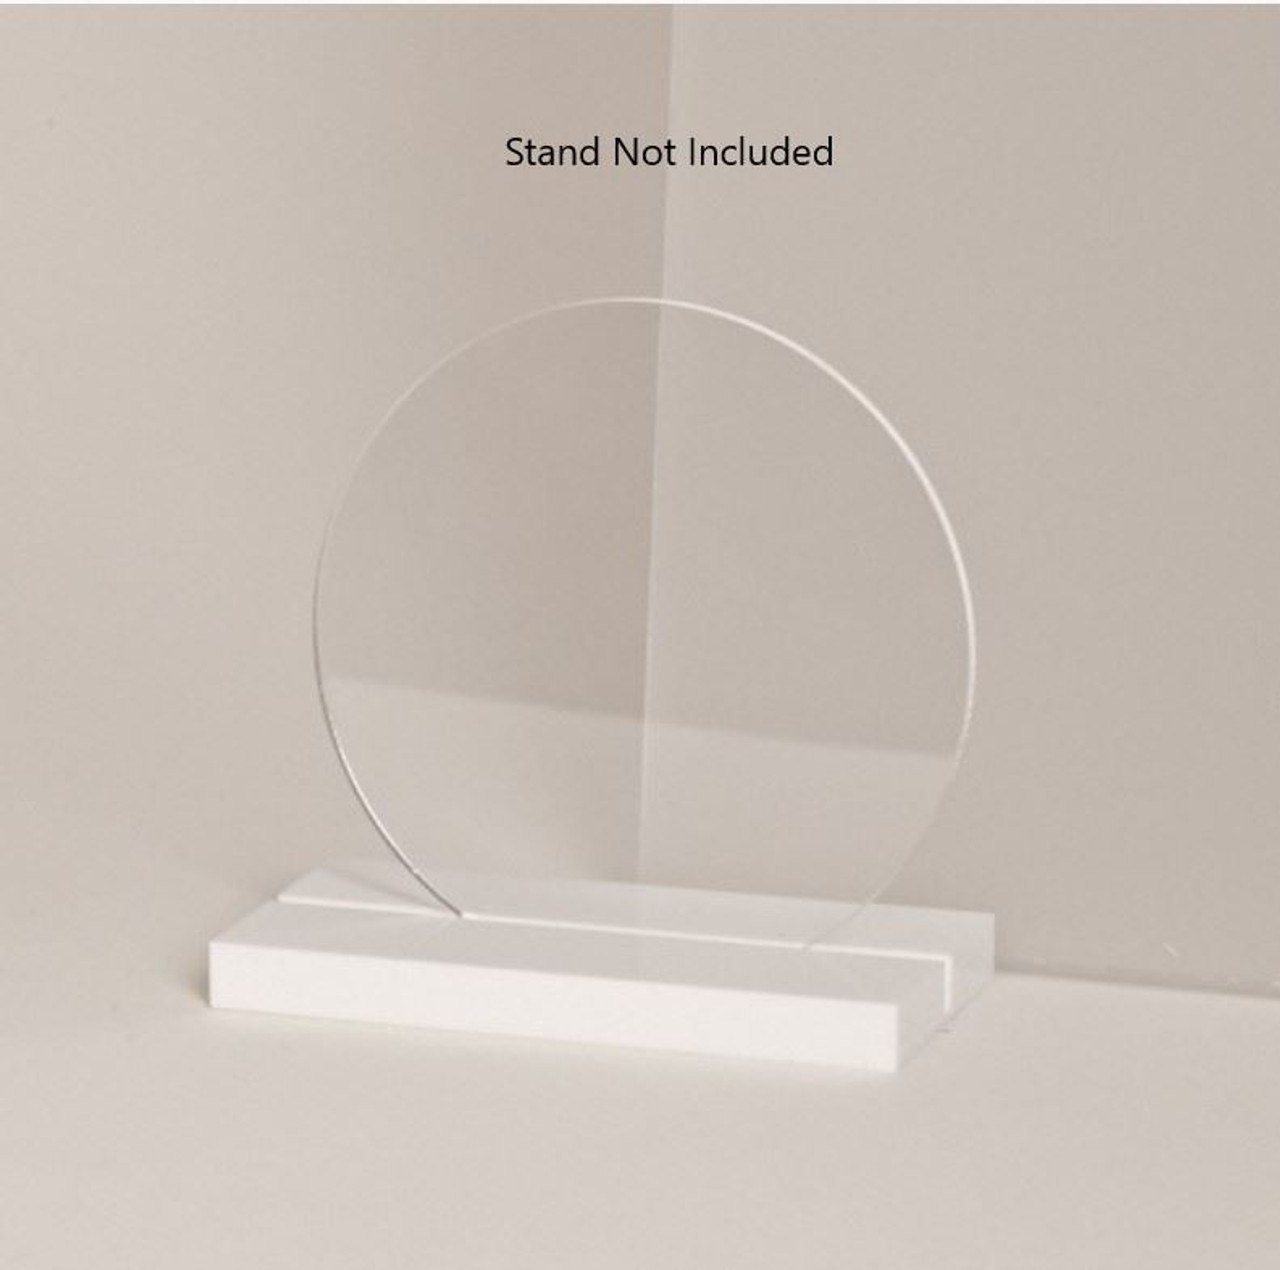 Laser Cut Acrylic Clear 30mm Circle Disc 5 Pack (Flat, No Hole)